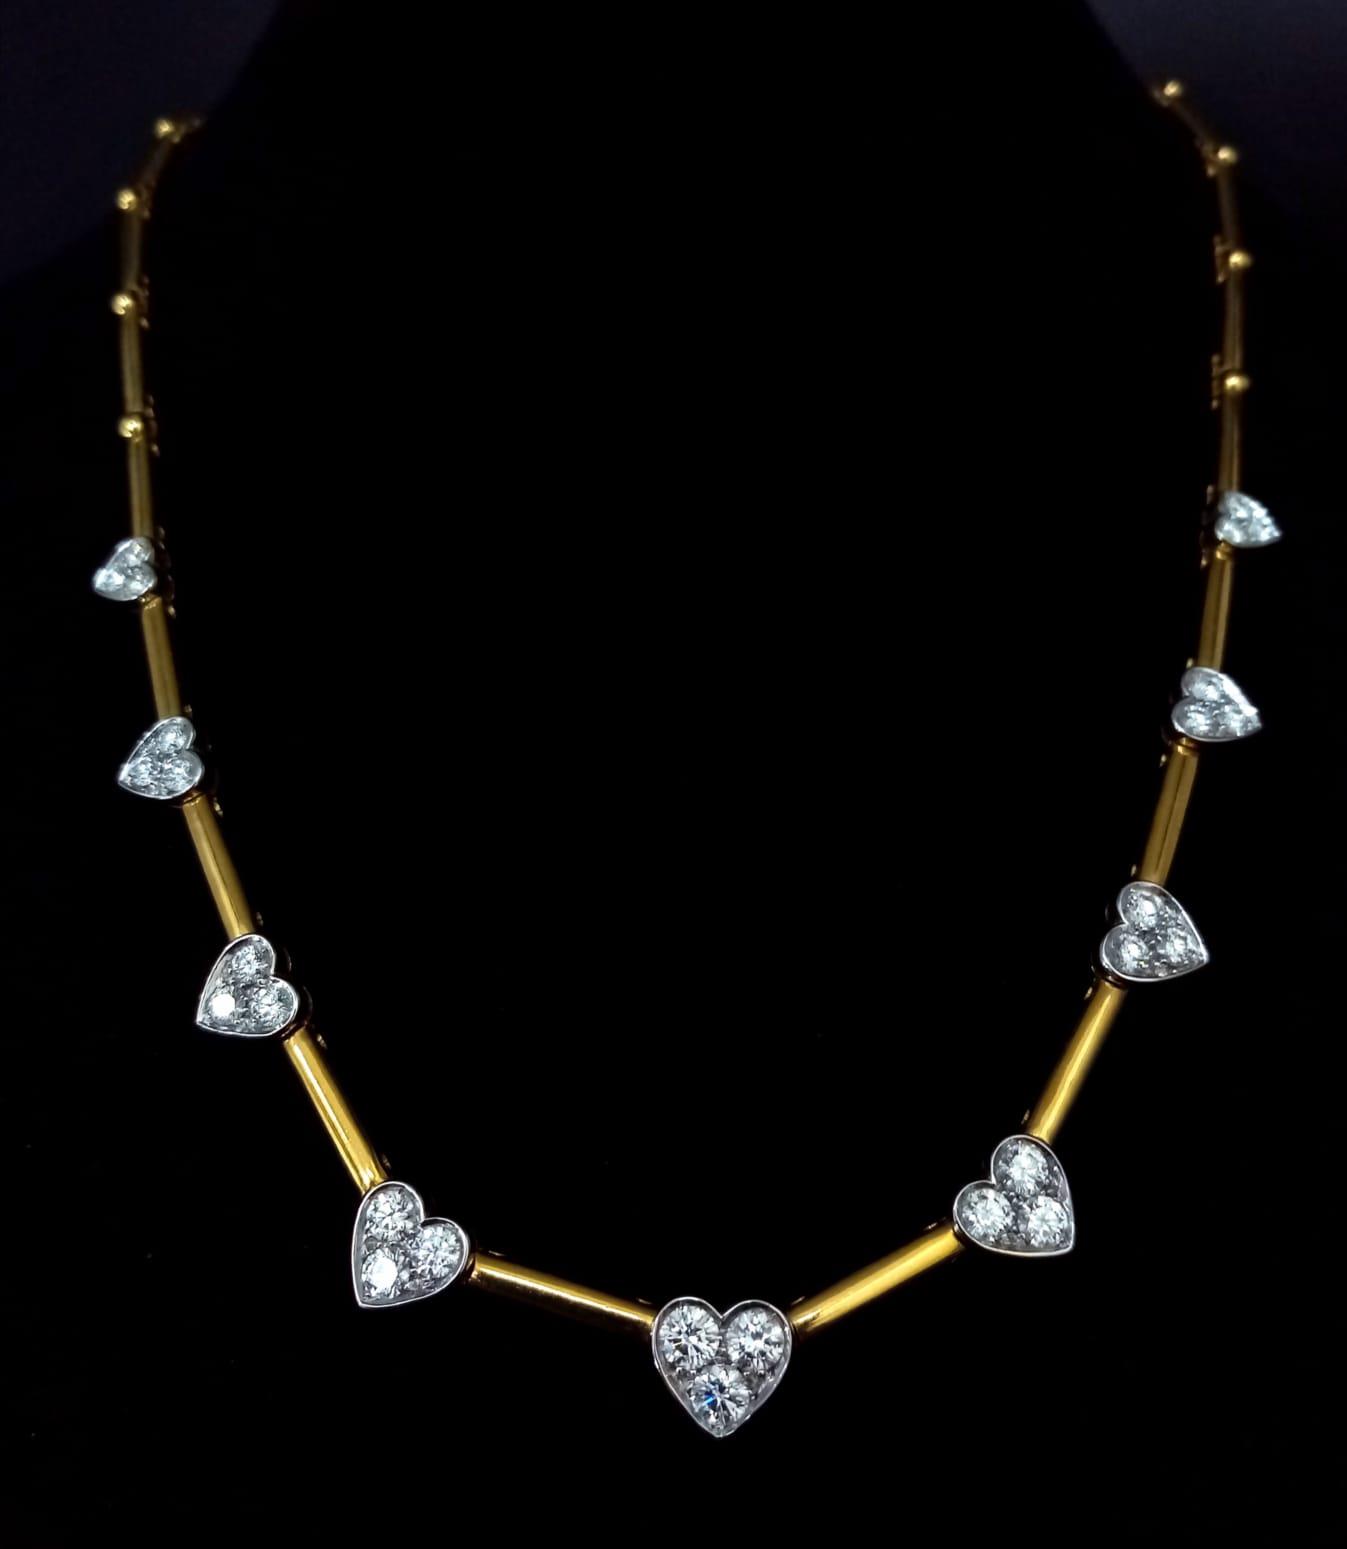 A Gorgeous 18K Gold and Heart-Diamond Necklace and Bracelet Set. The necklace is decorated with - Image 8 of 21